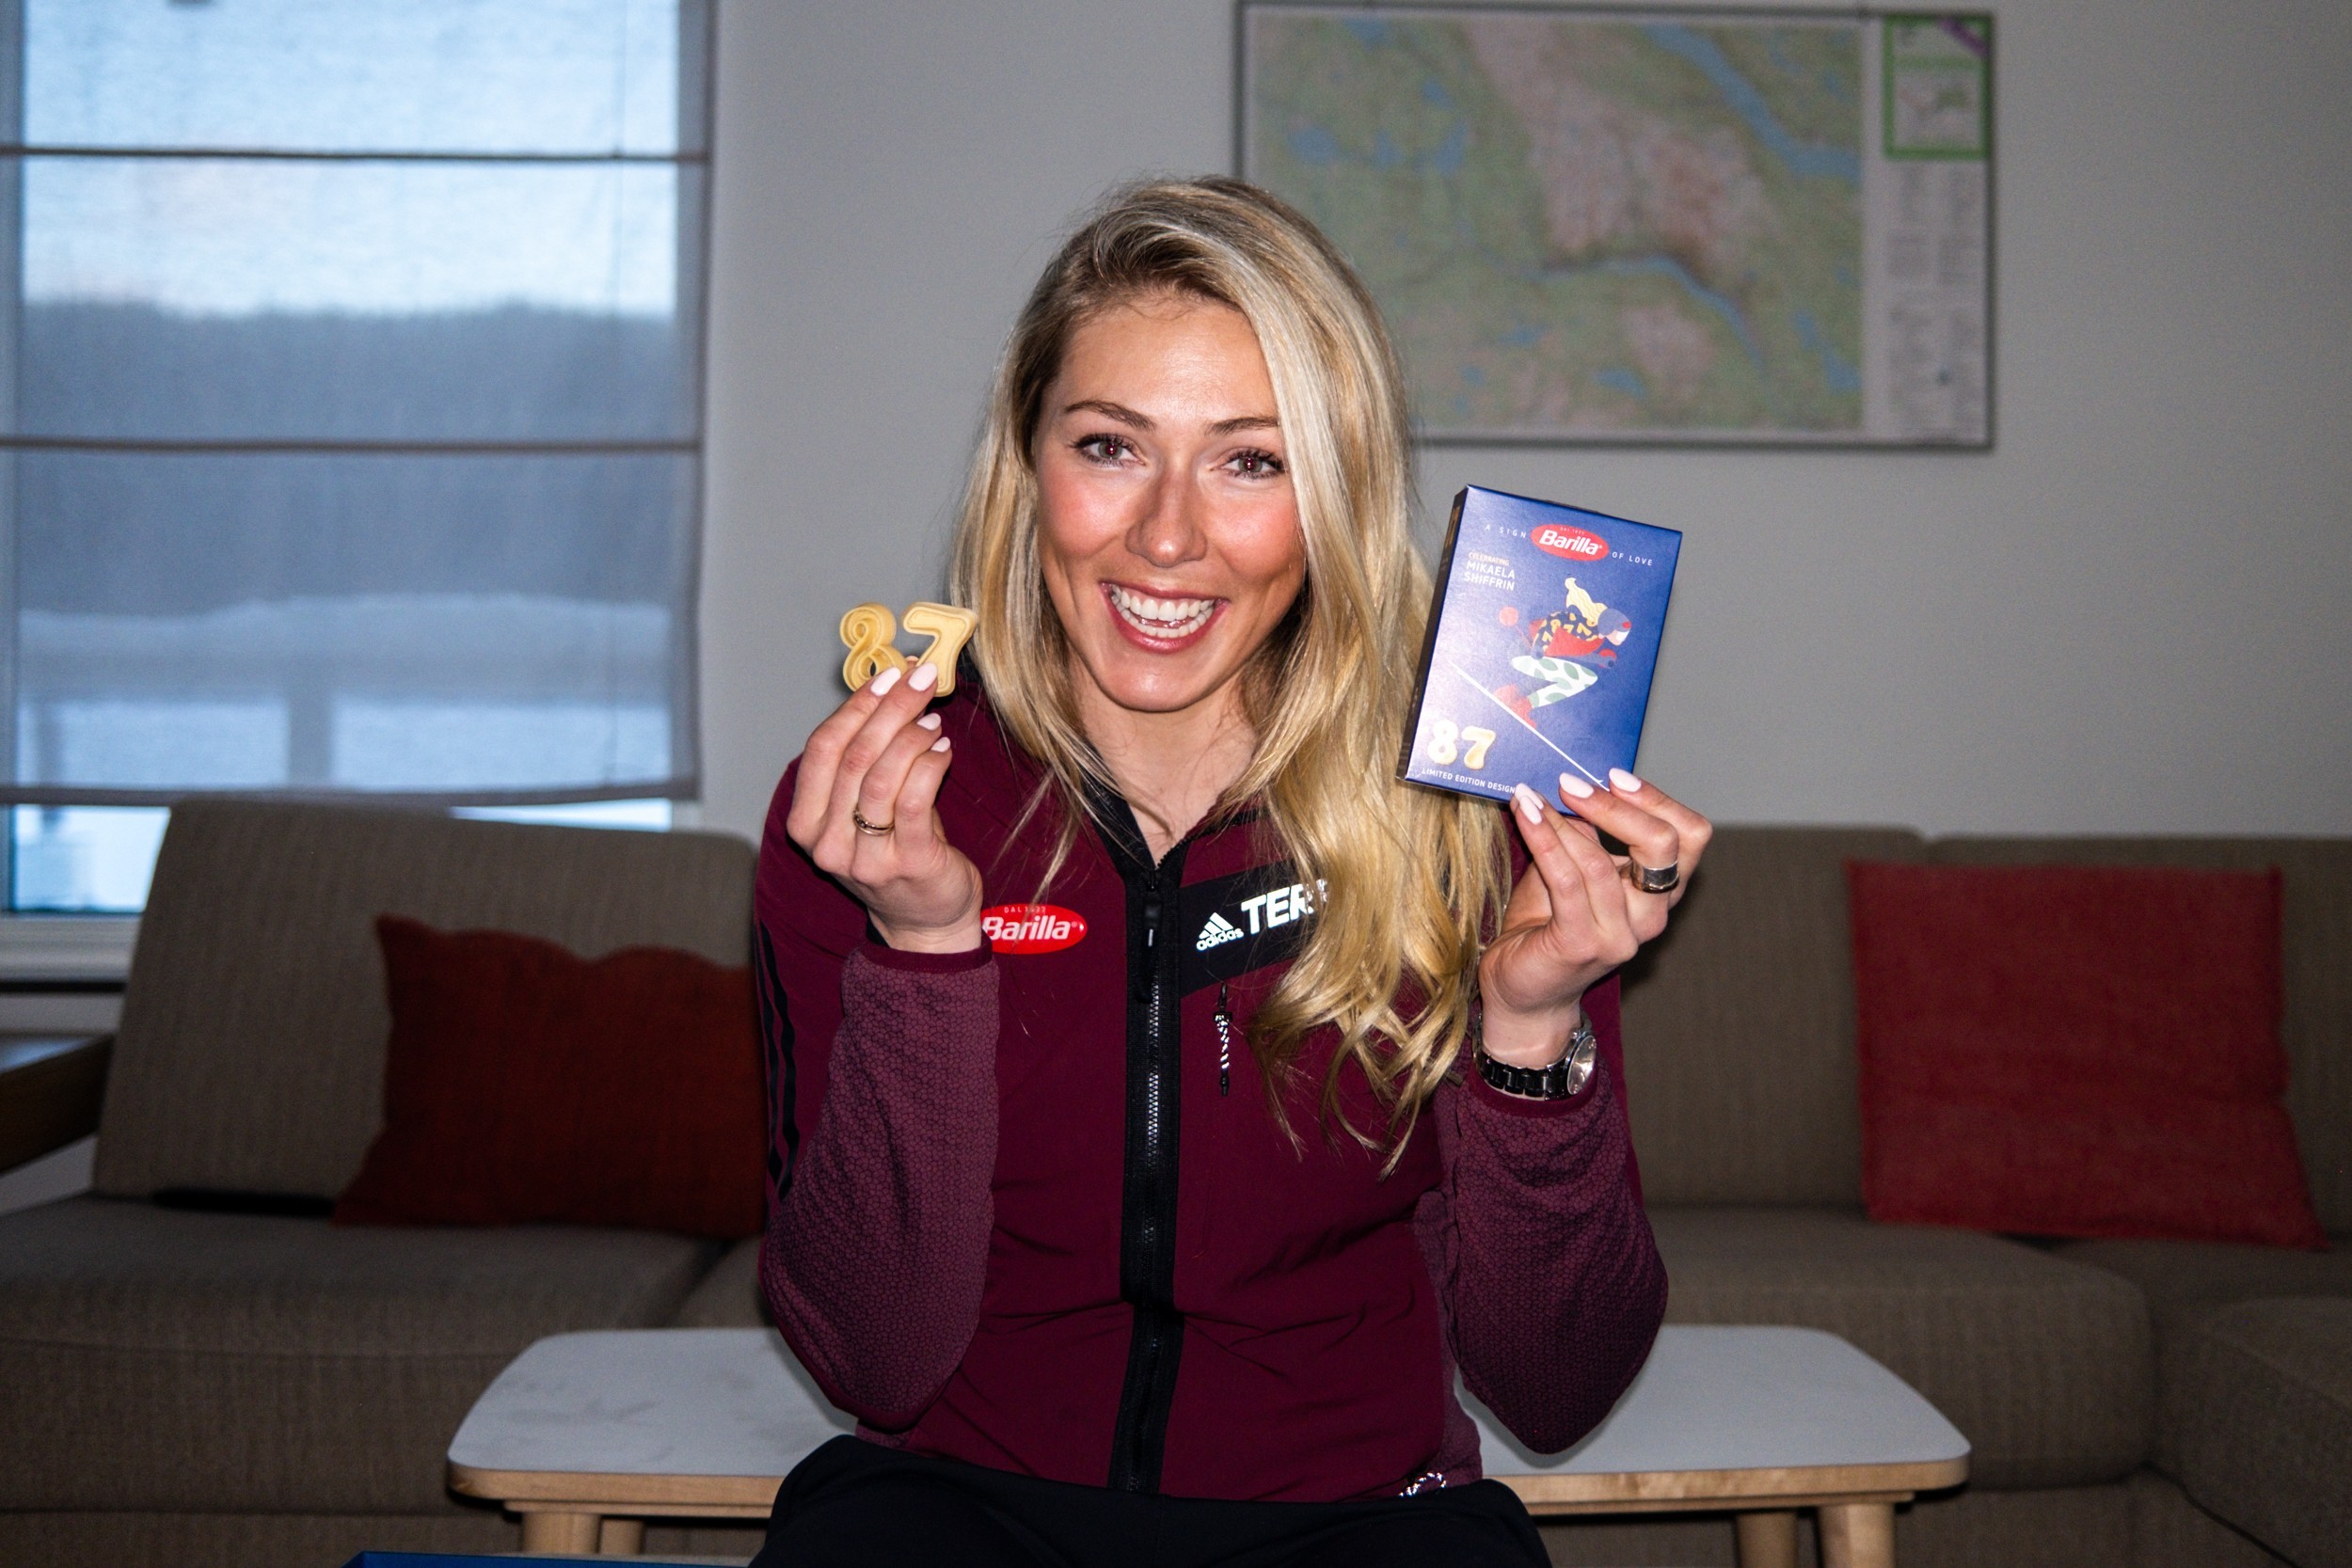 Barilla & Mikaela Shiffrin: Greatness starts with a great recipe - Pack No. 8  